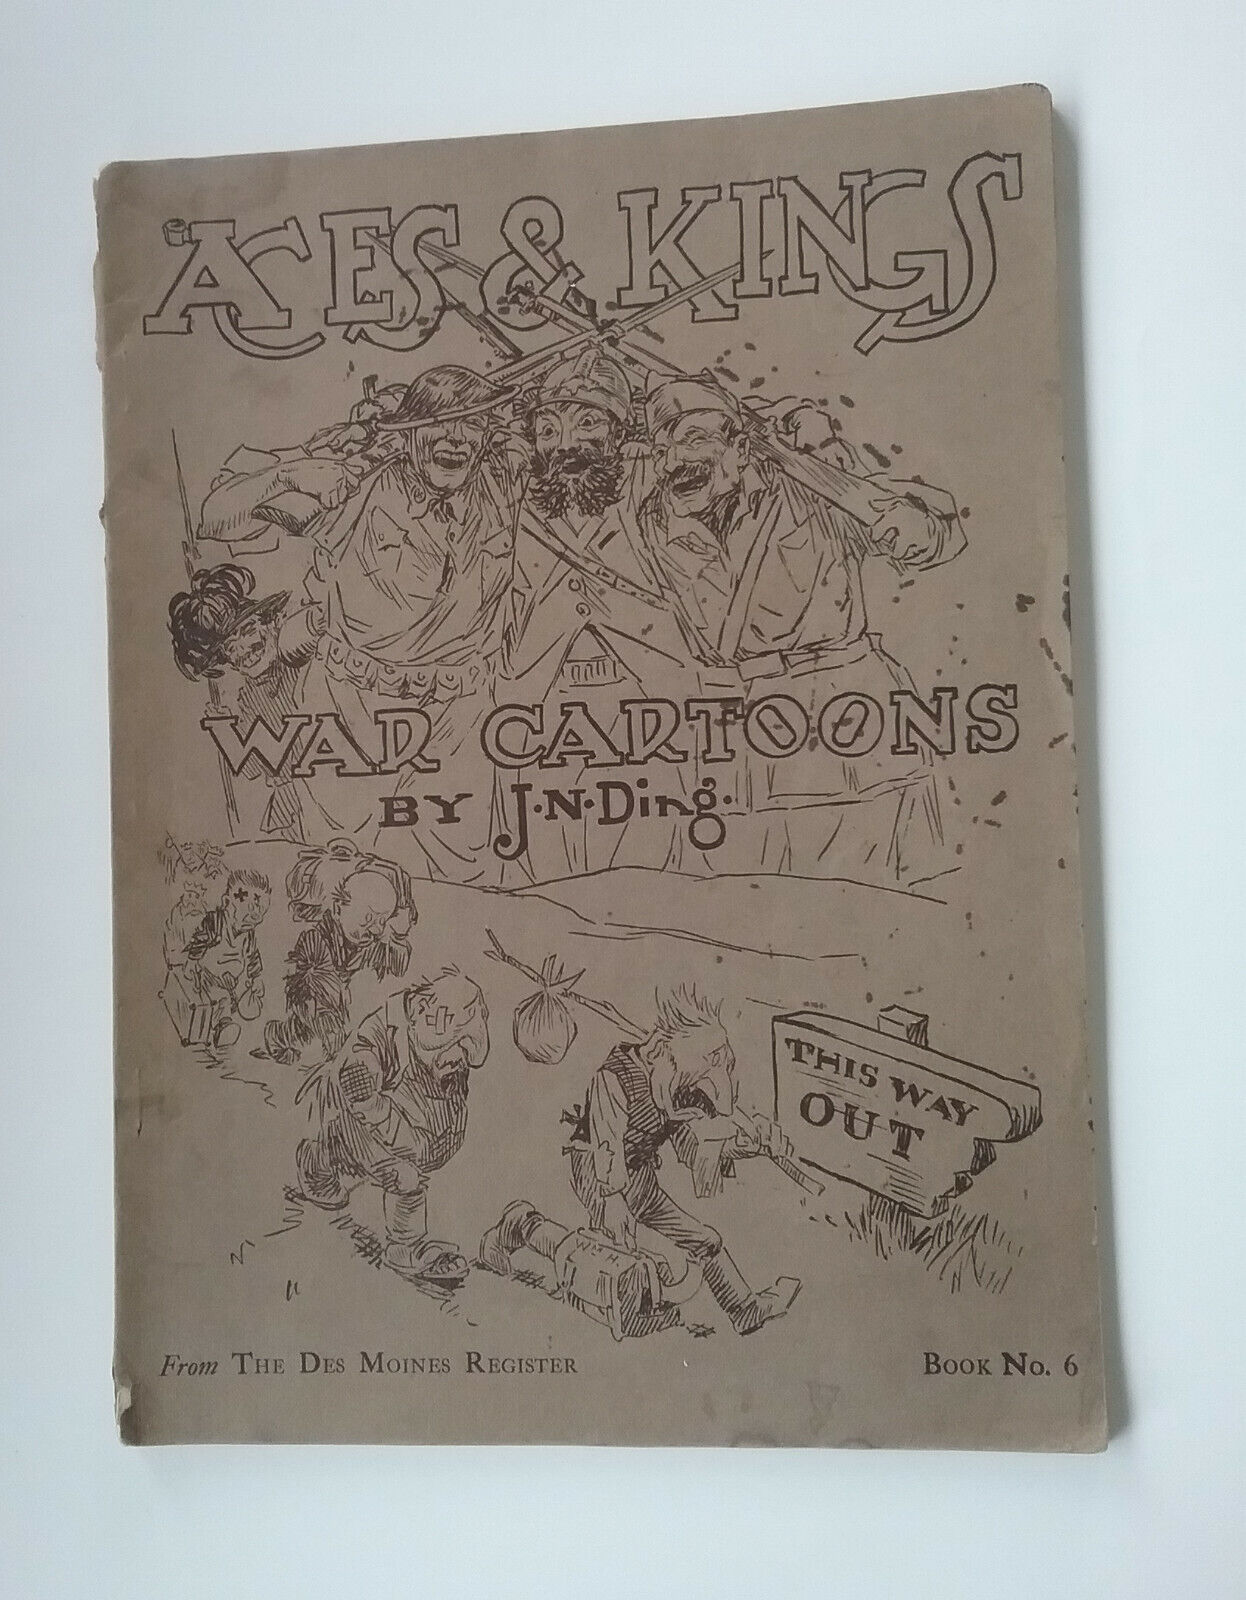 ACES & KINGS War Cartoons By J. N. DING Book No. 6  from the Des Moines Register